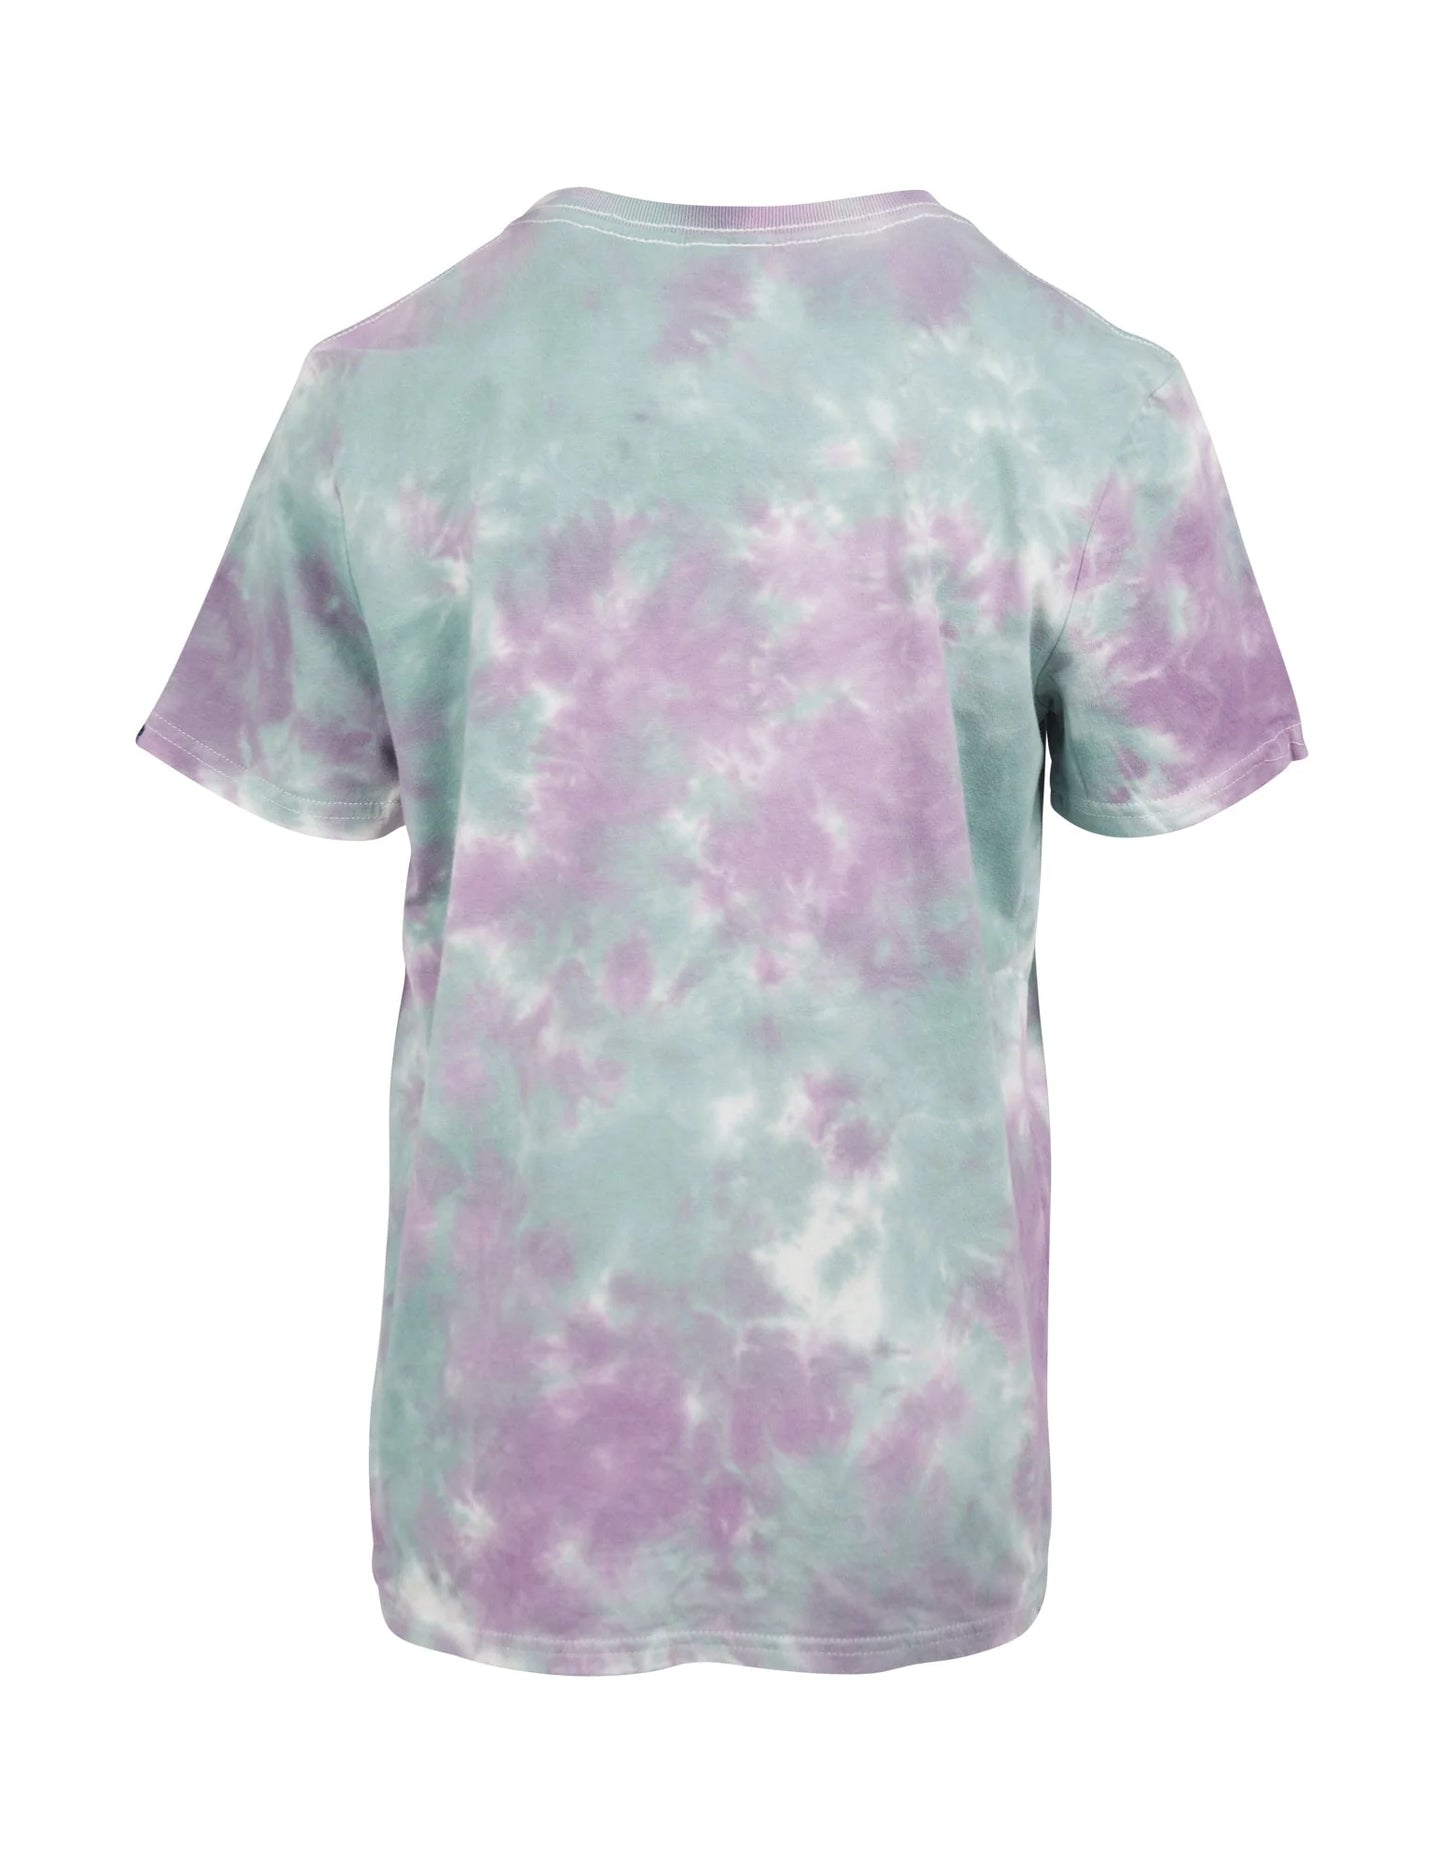 ST GOLIATH Sprinkle Youth Tee - Multicoloured